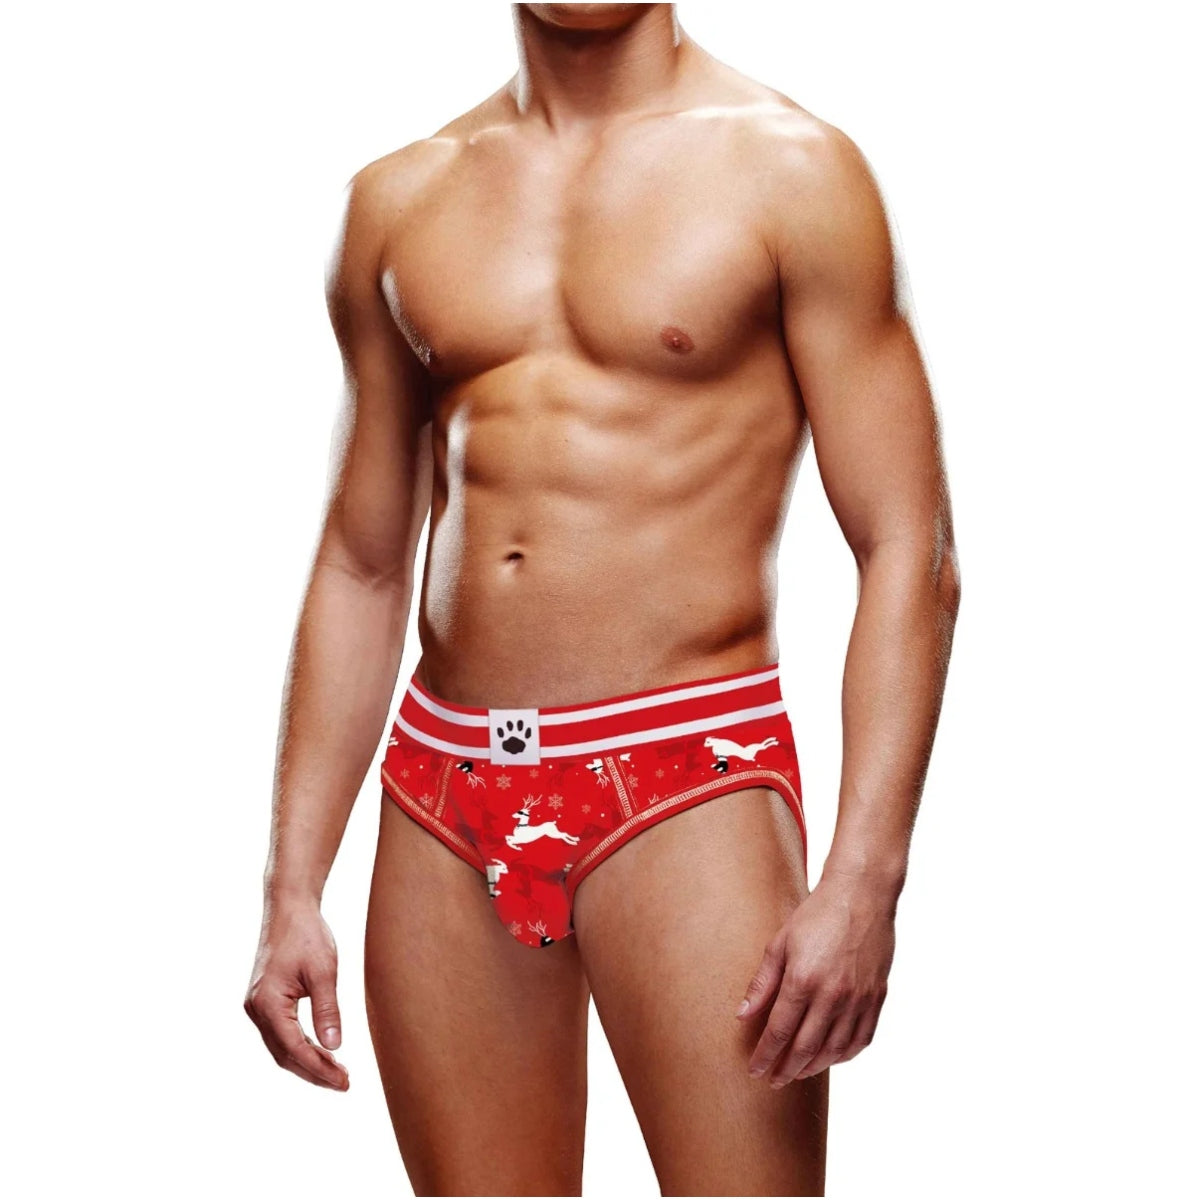 Prowler Reindeer Backless Brief Red White